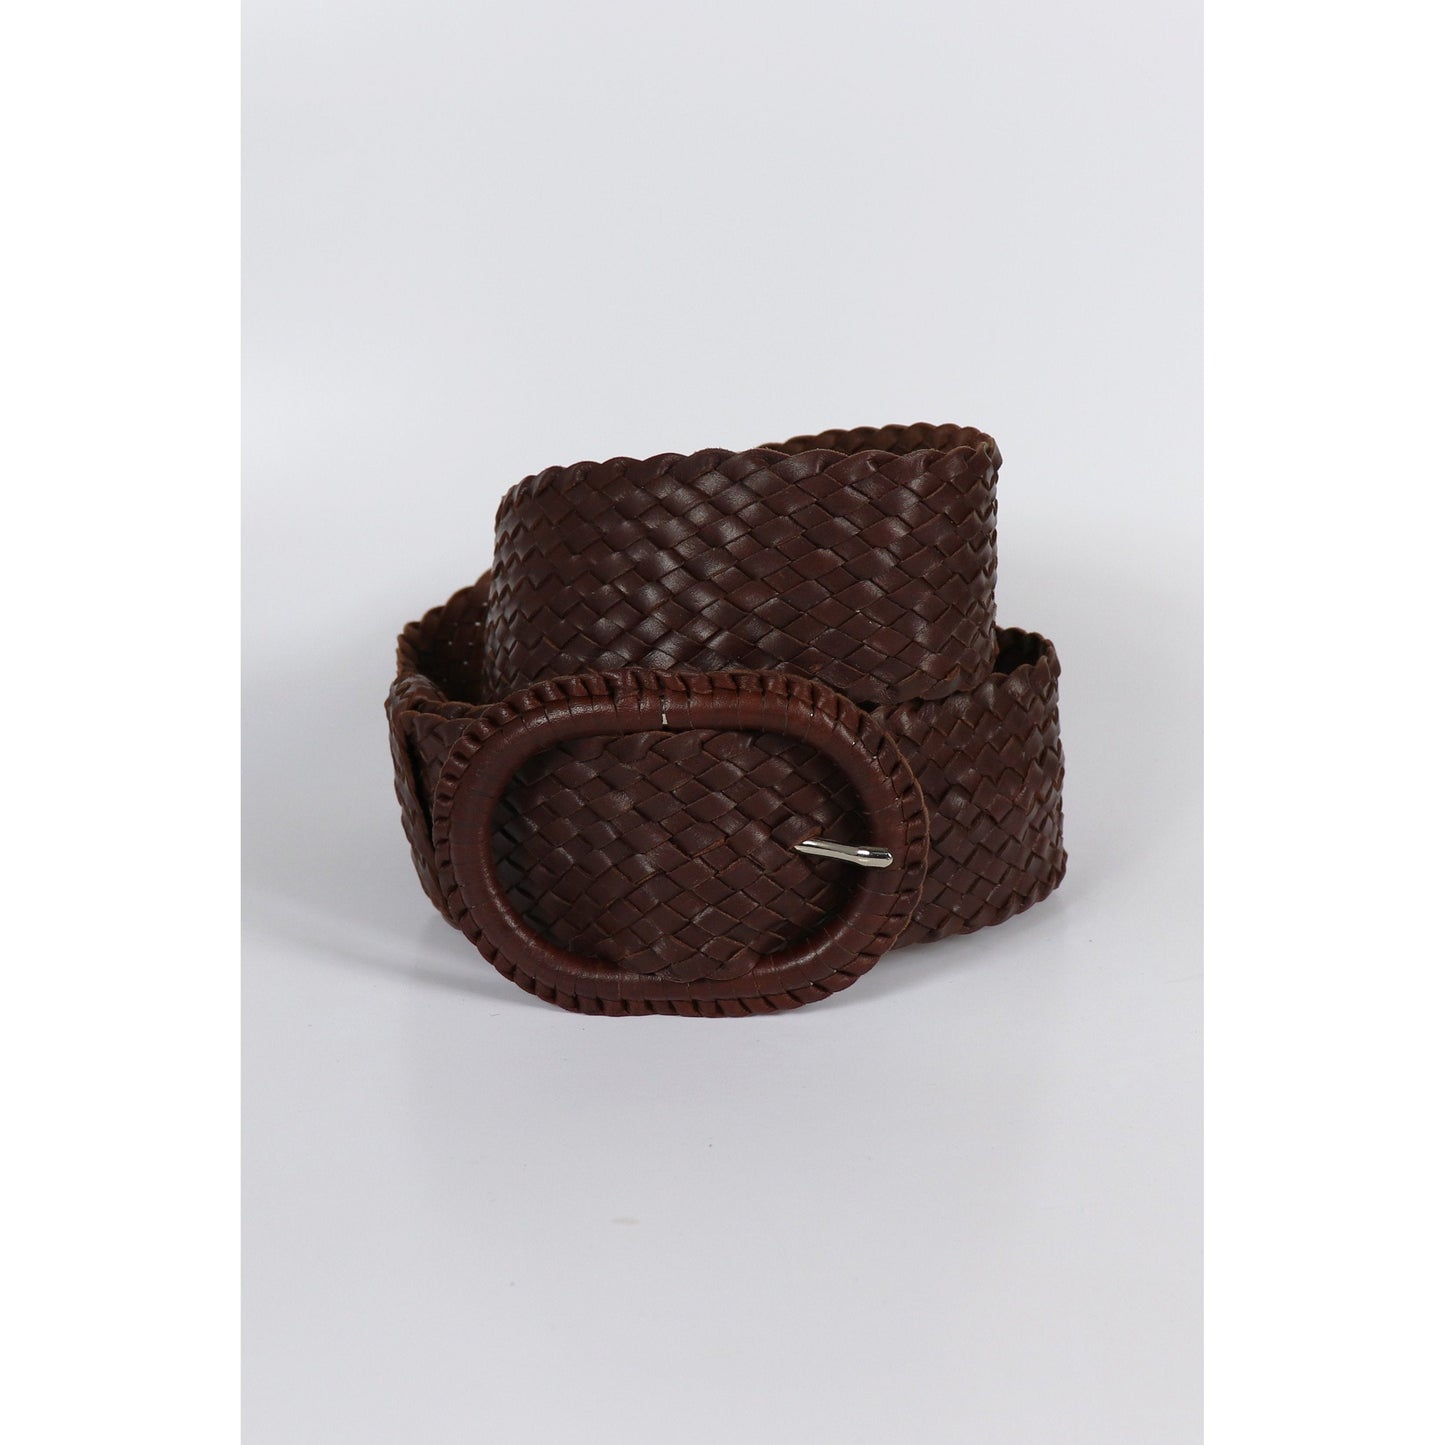 Brown woven leather belt coiled